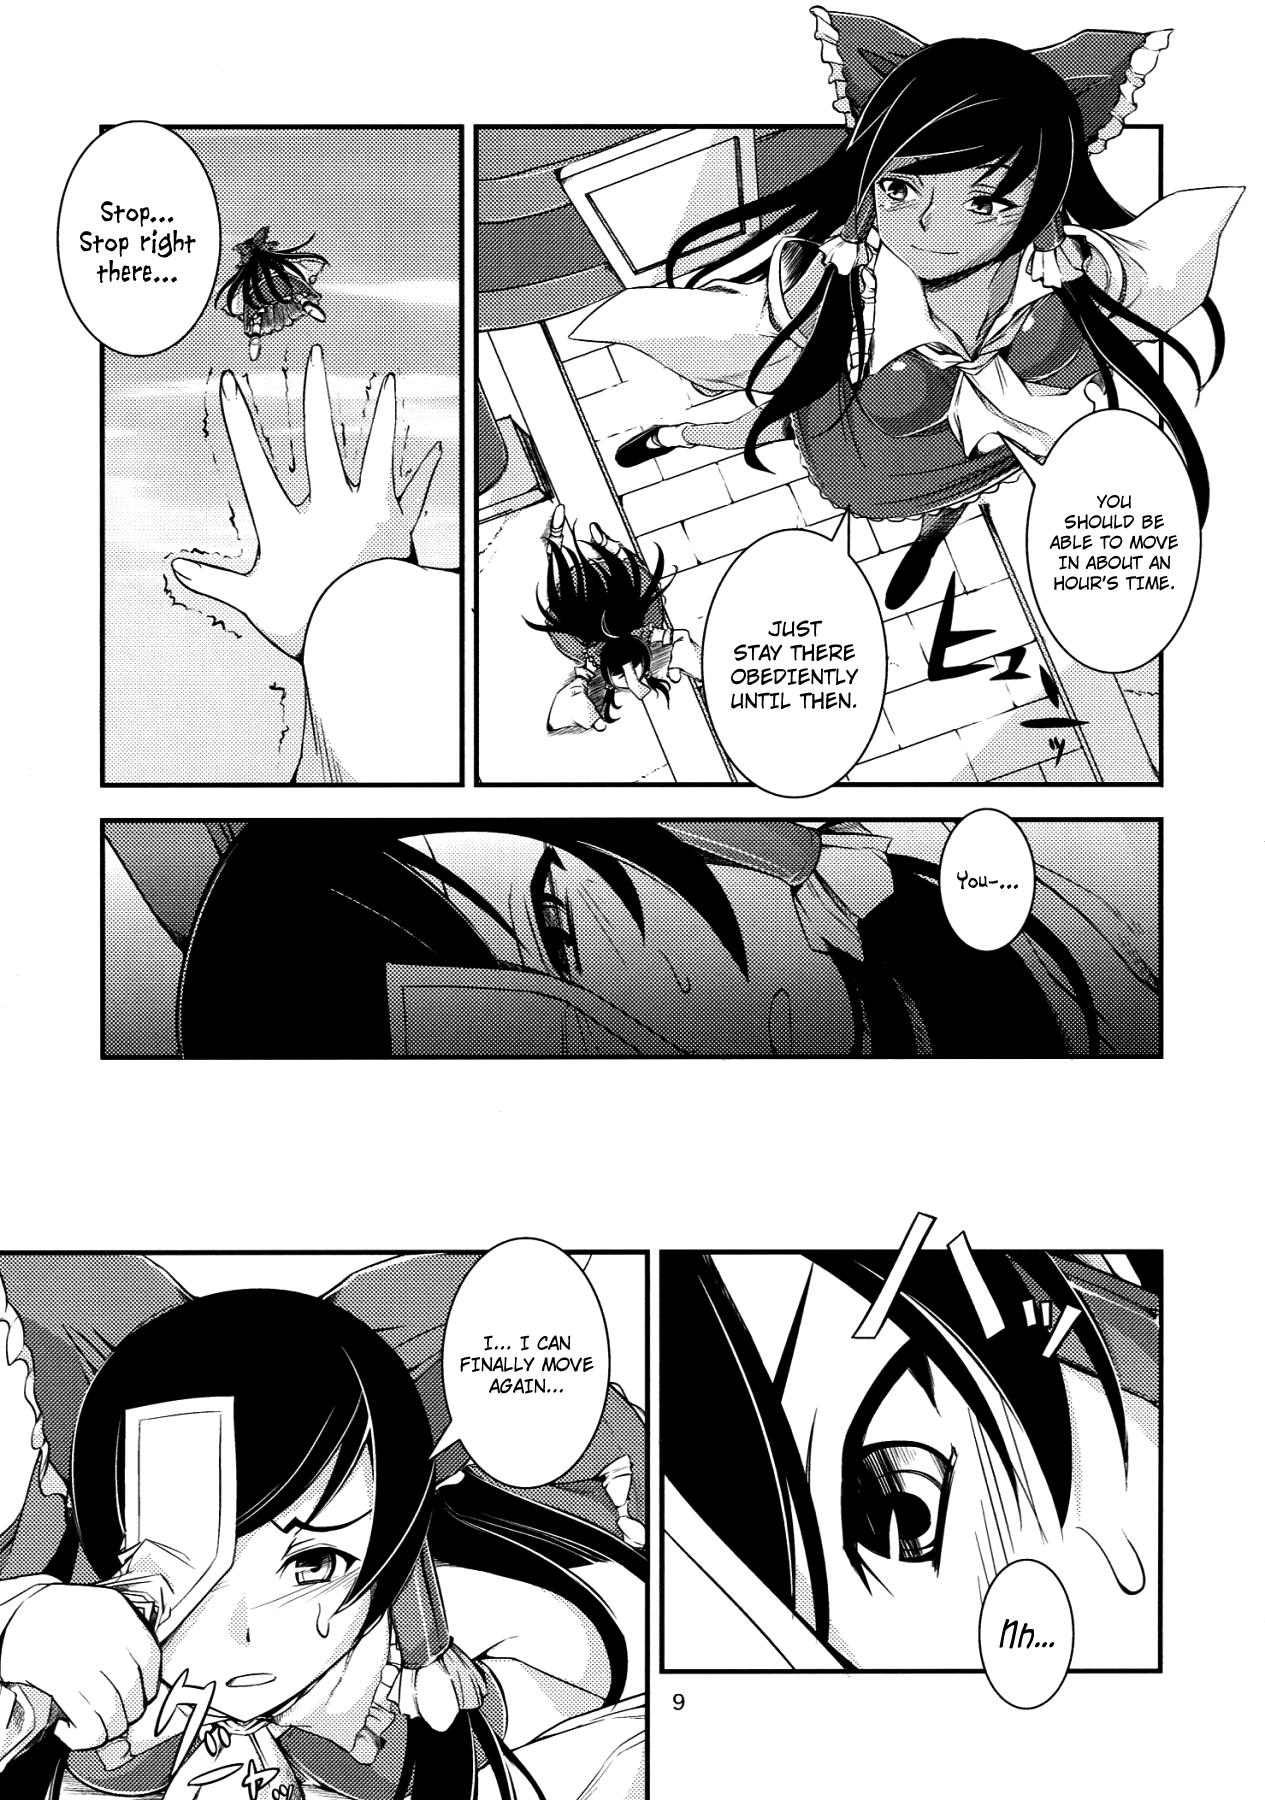 Groupfuck The Incident of the Black Shrine Maiden - Touhou project Exhib - Page 8